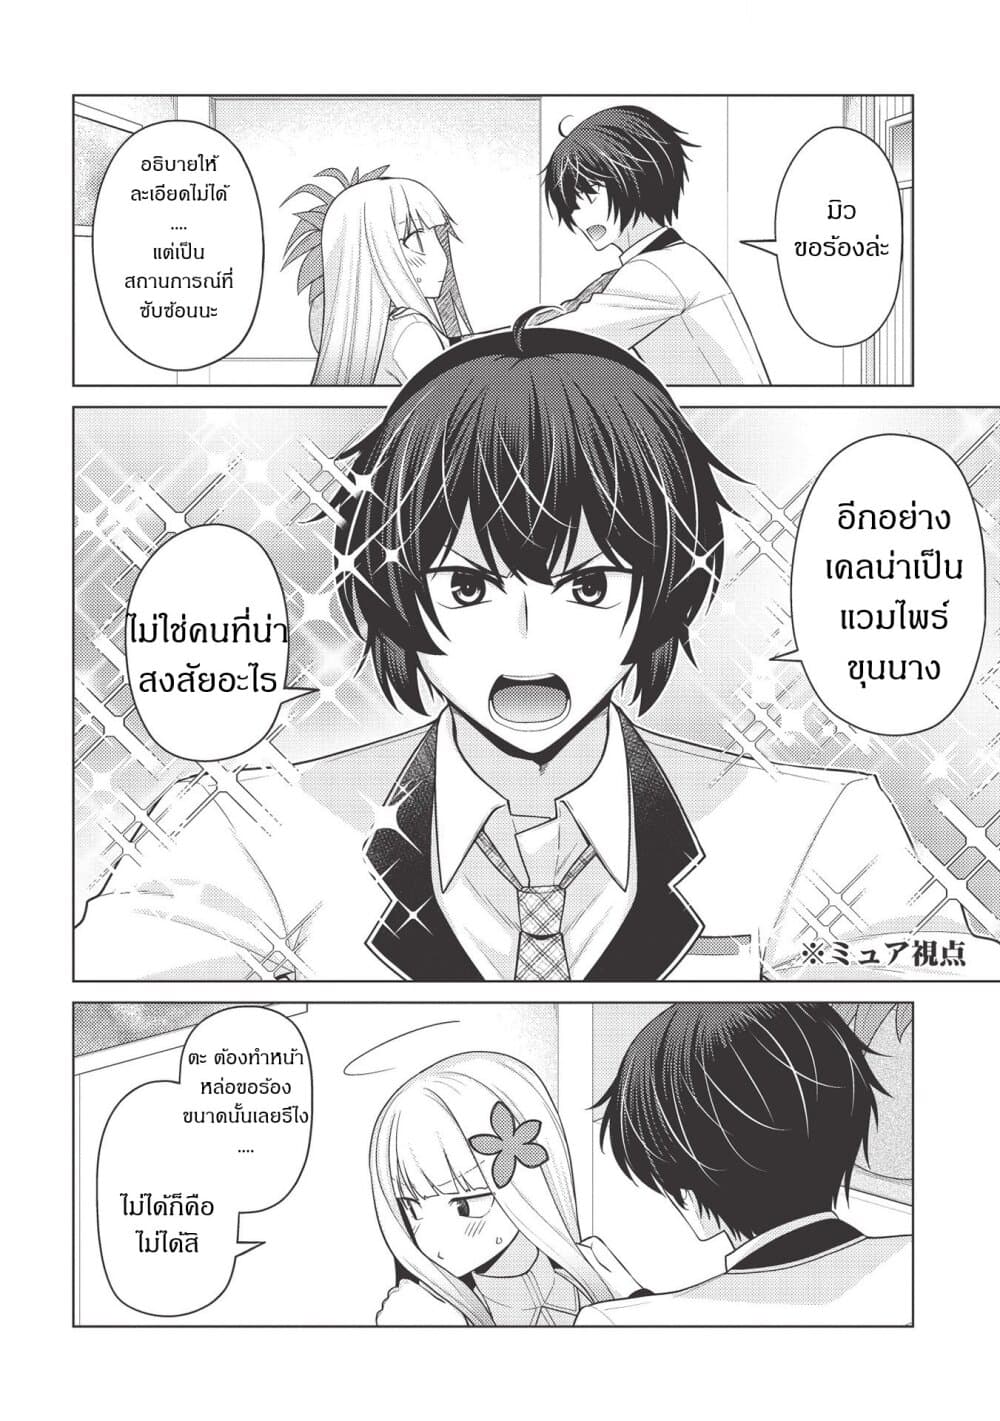 Tales of Taking Throne Who the Weakest and Incompetent Student 6-วันๆกับยัยแวมไพร์ (3)